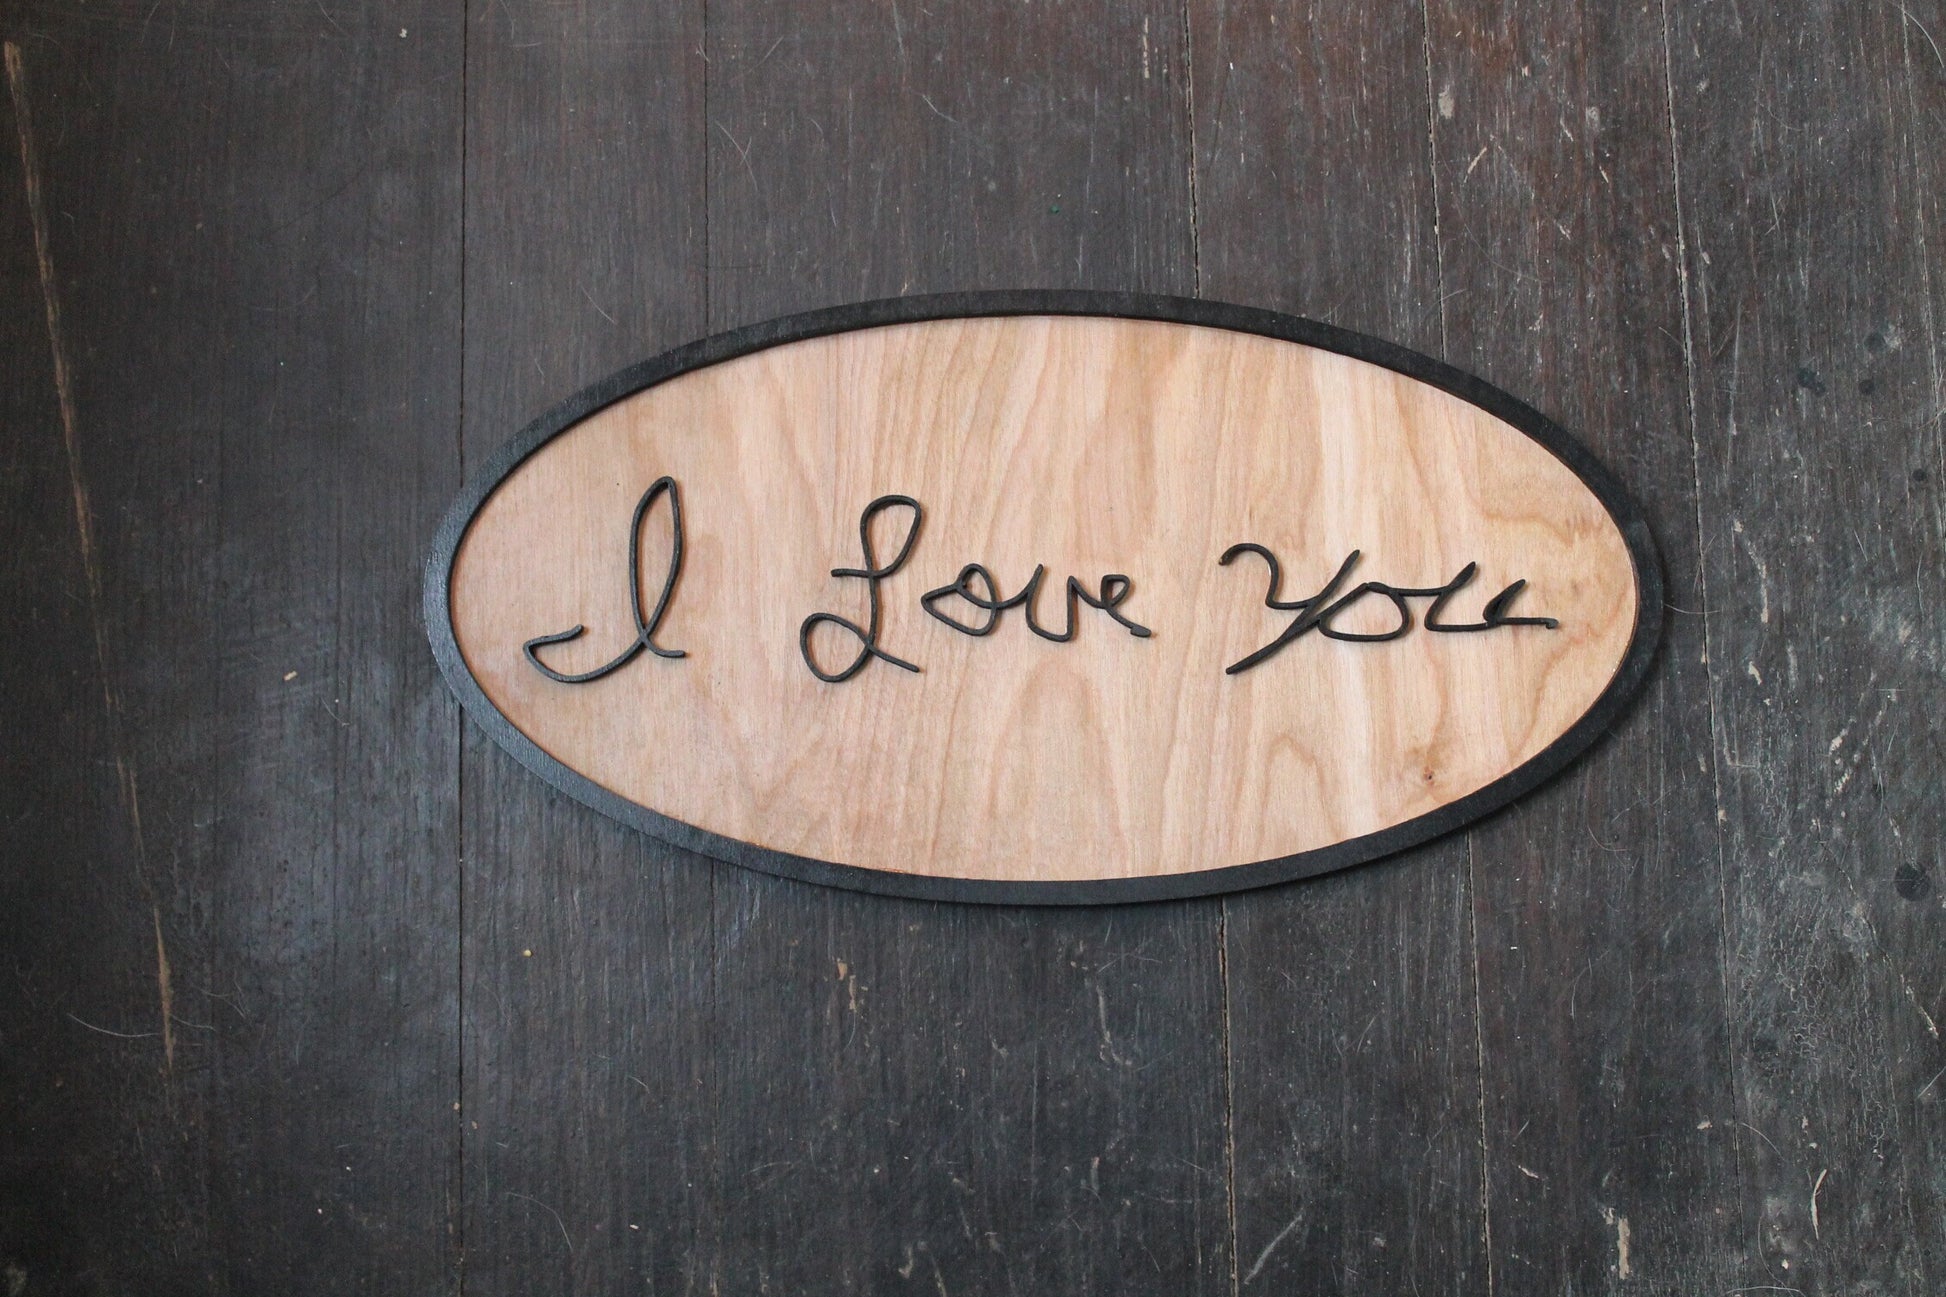 Your Handwriting, Actual Hand writing sign, Oval, Framed, custom personalized wood decor shabby chic rustic primitive, handwriting